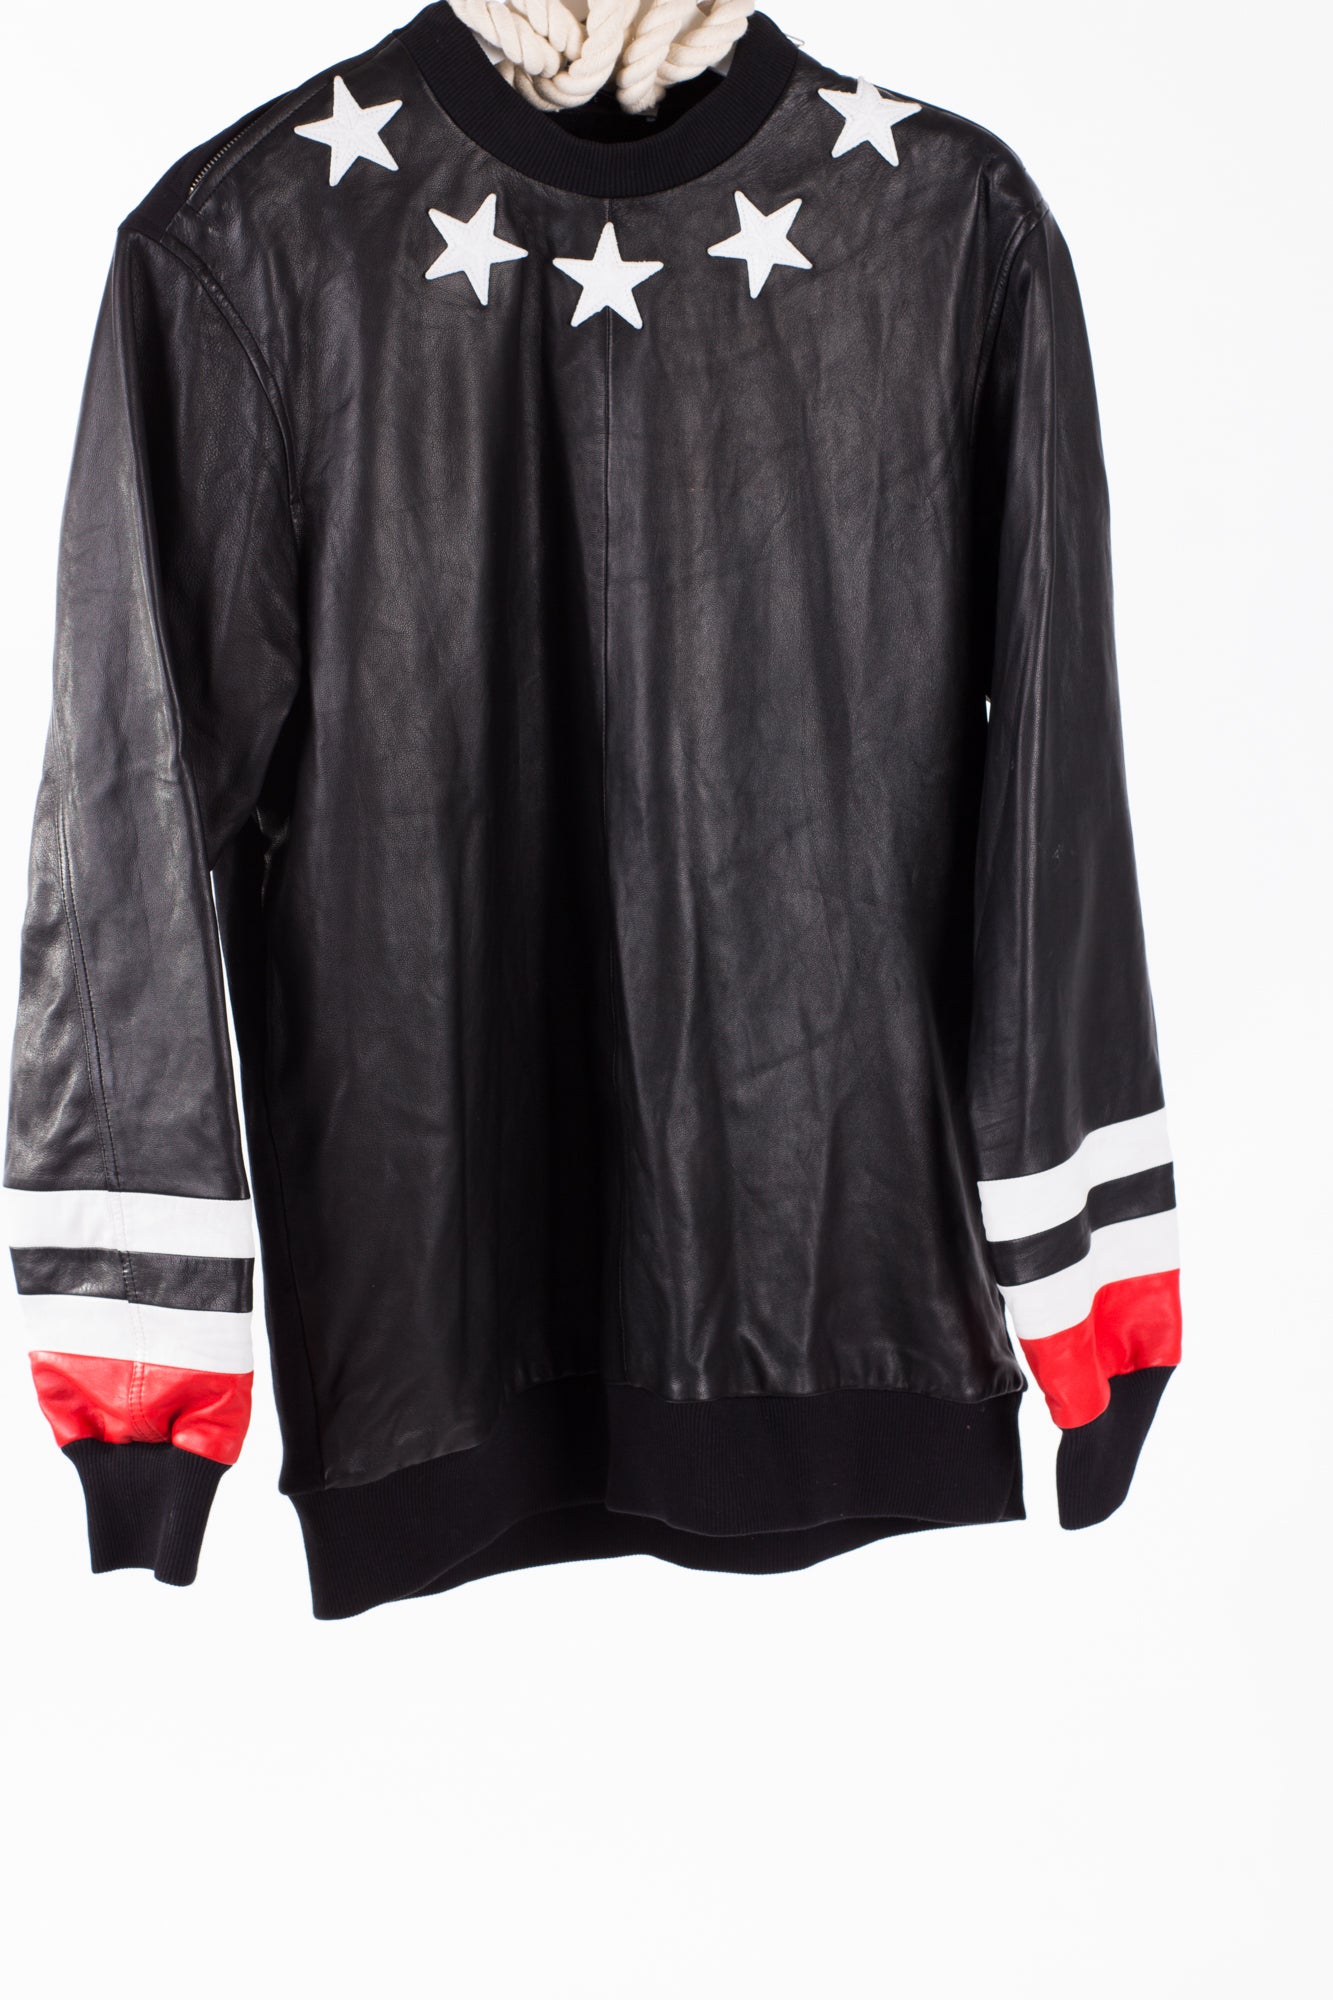 Givenchy Men's Black Stars Leather Jumper – LUXE RELOADED